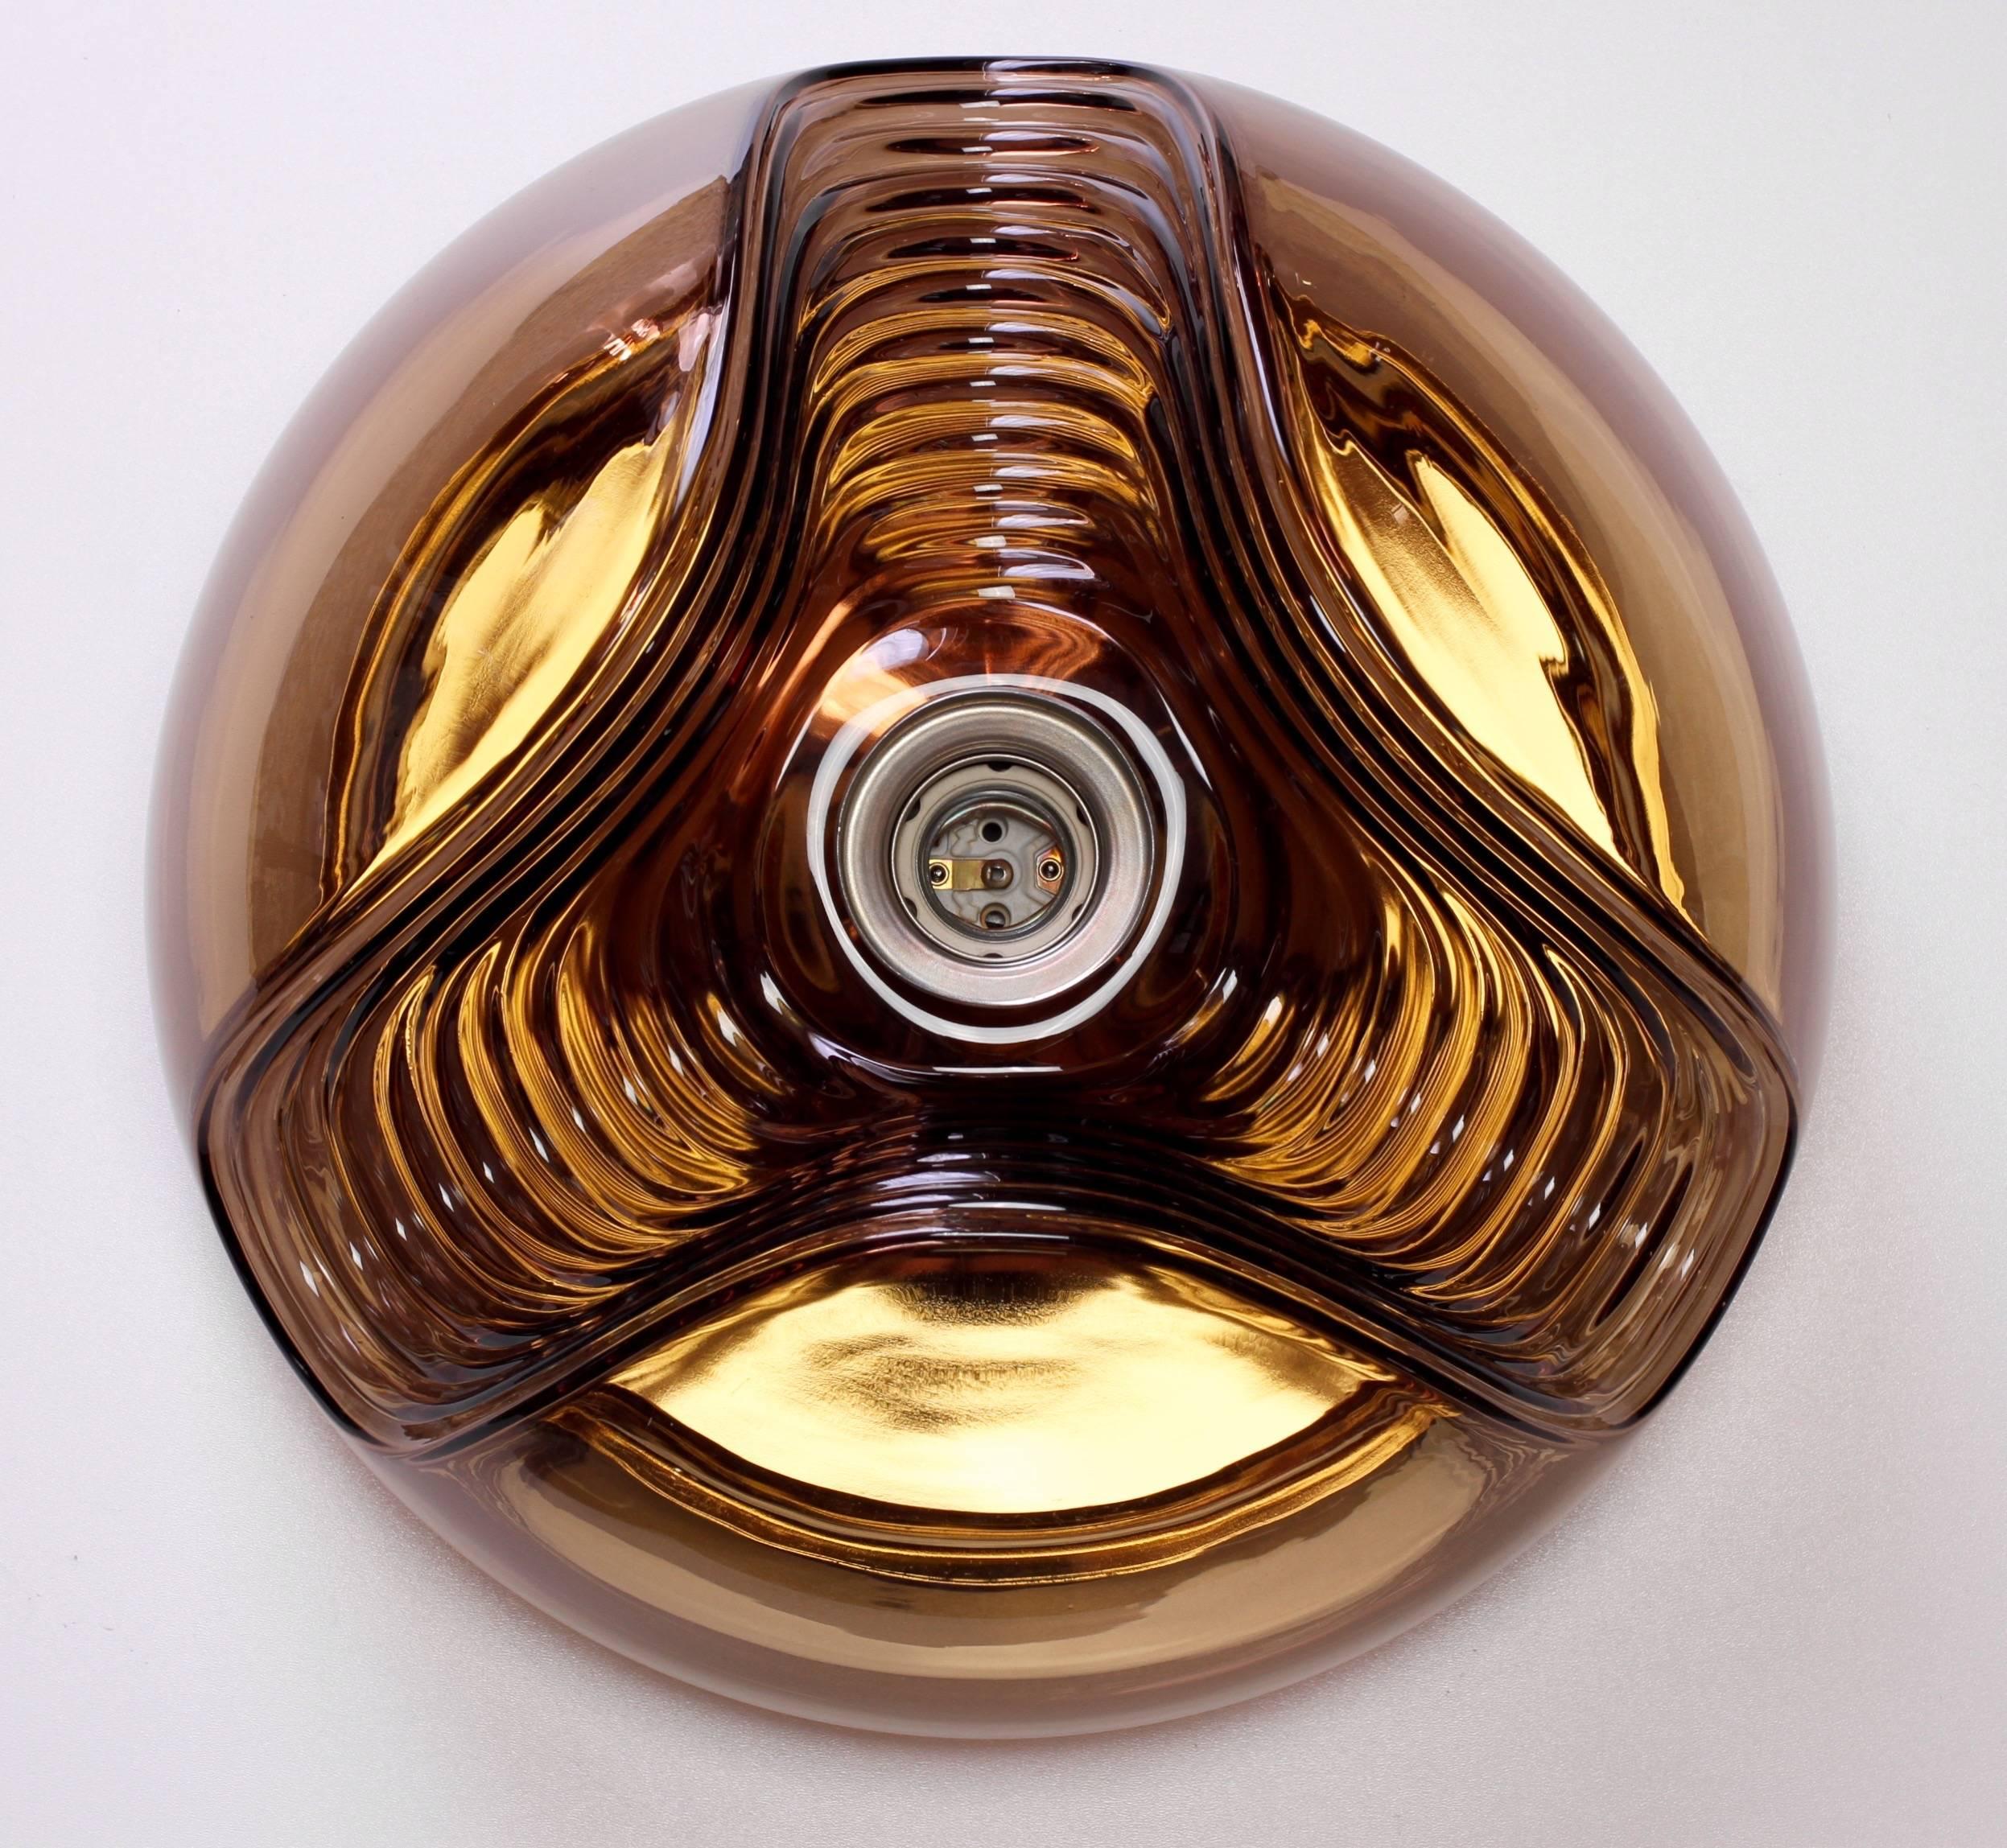 One of a set of four midcentury, German made flush mount wall lights or sconces by Peill & Putzler in the 1970s. This is an absolutely Classic piece of German design, featuring a smoked toned colored glass globe shade with a waved/ribbed molded